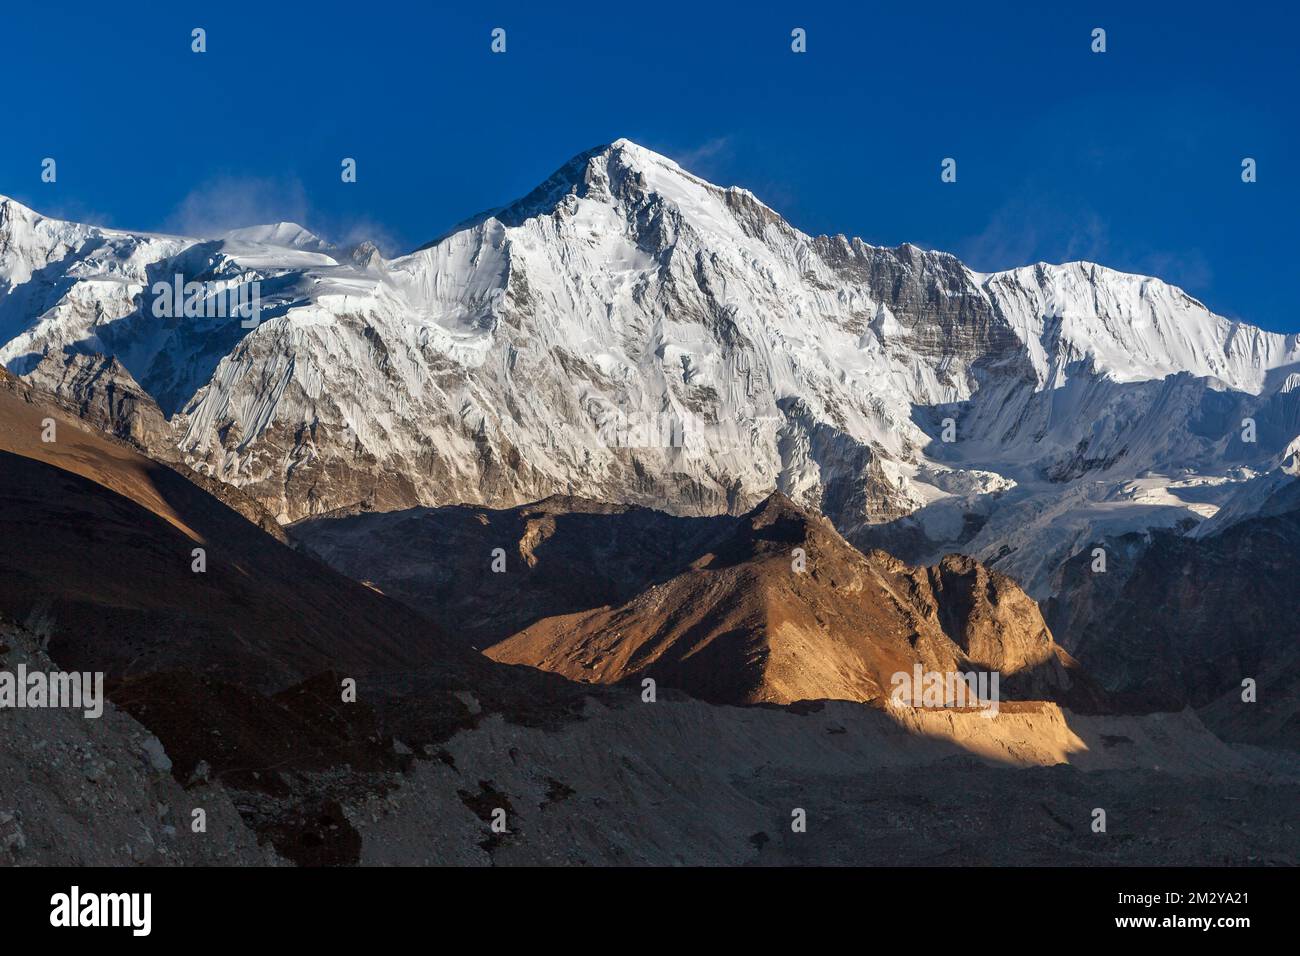 Cho Oyu mountain peak lit up by the sun lights at sunset. Beautiful landscape on a clear day high in the Himalayan mountains, Sagarmatha National Park Stock Photo